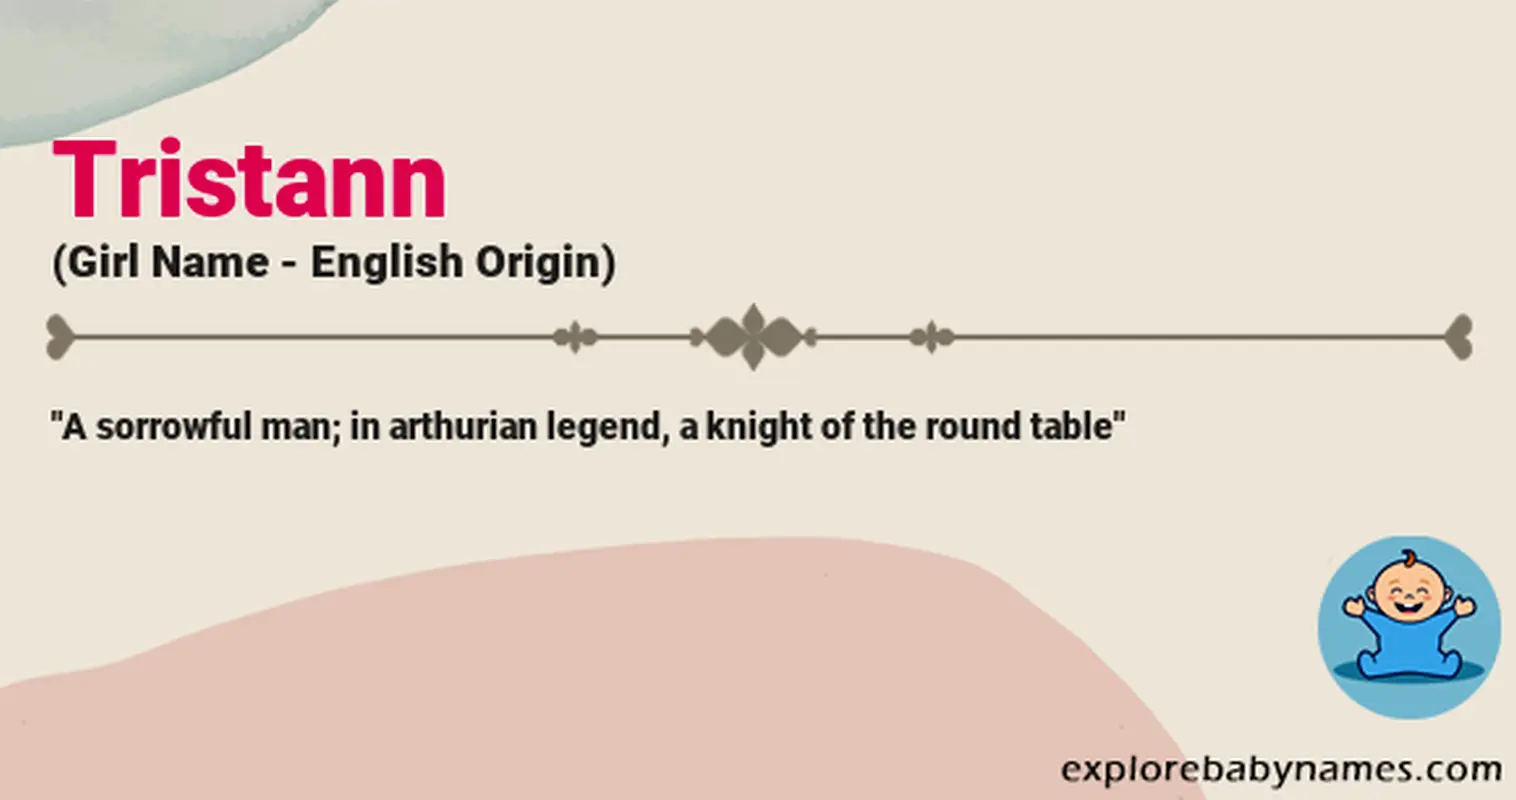 Meaning of Tristann